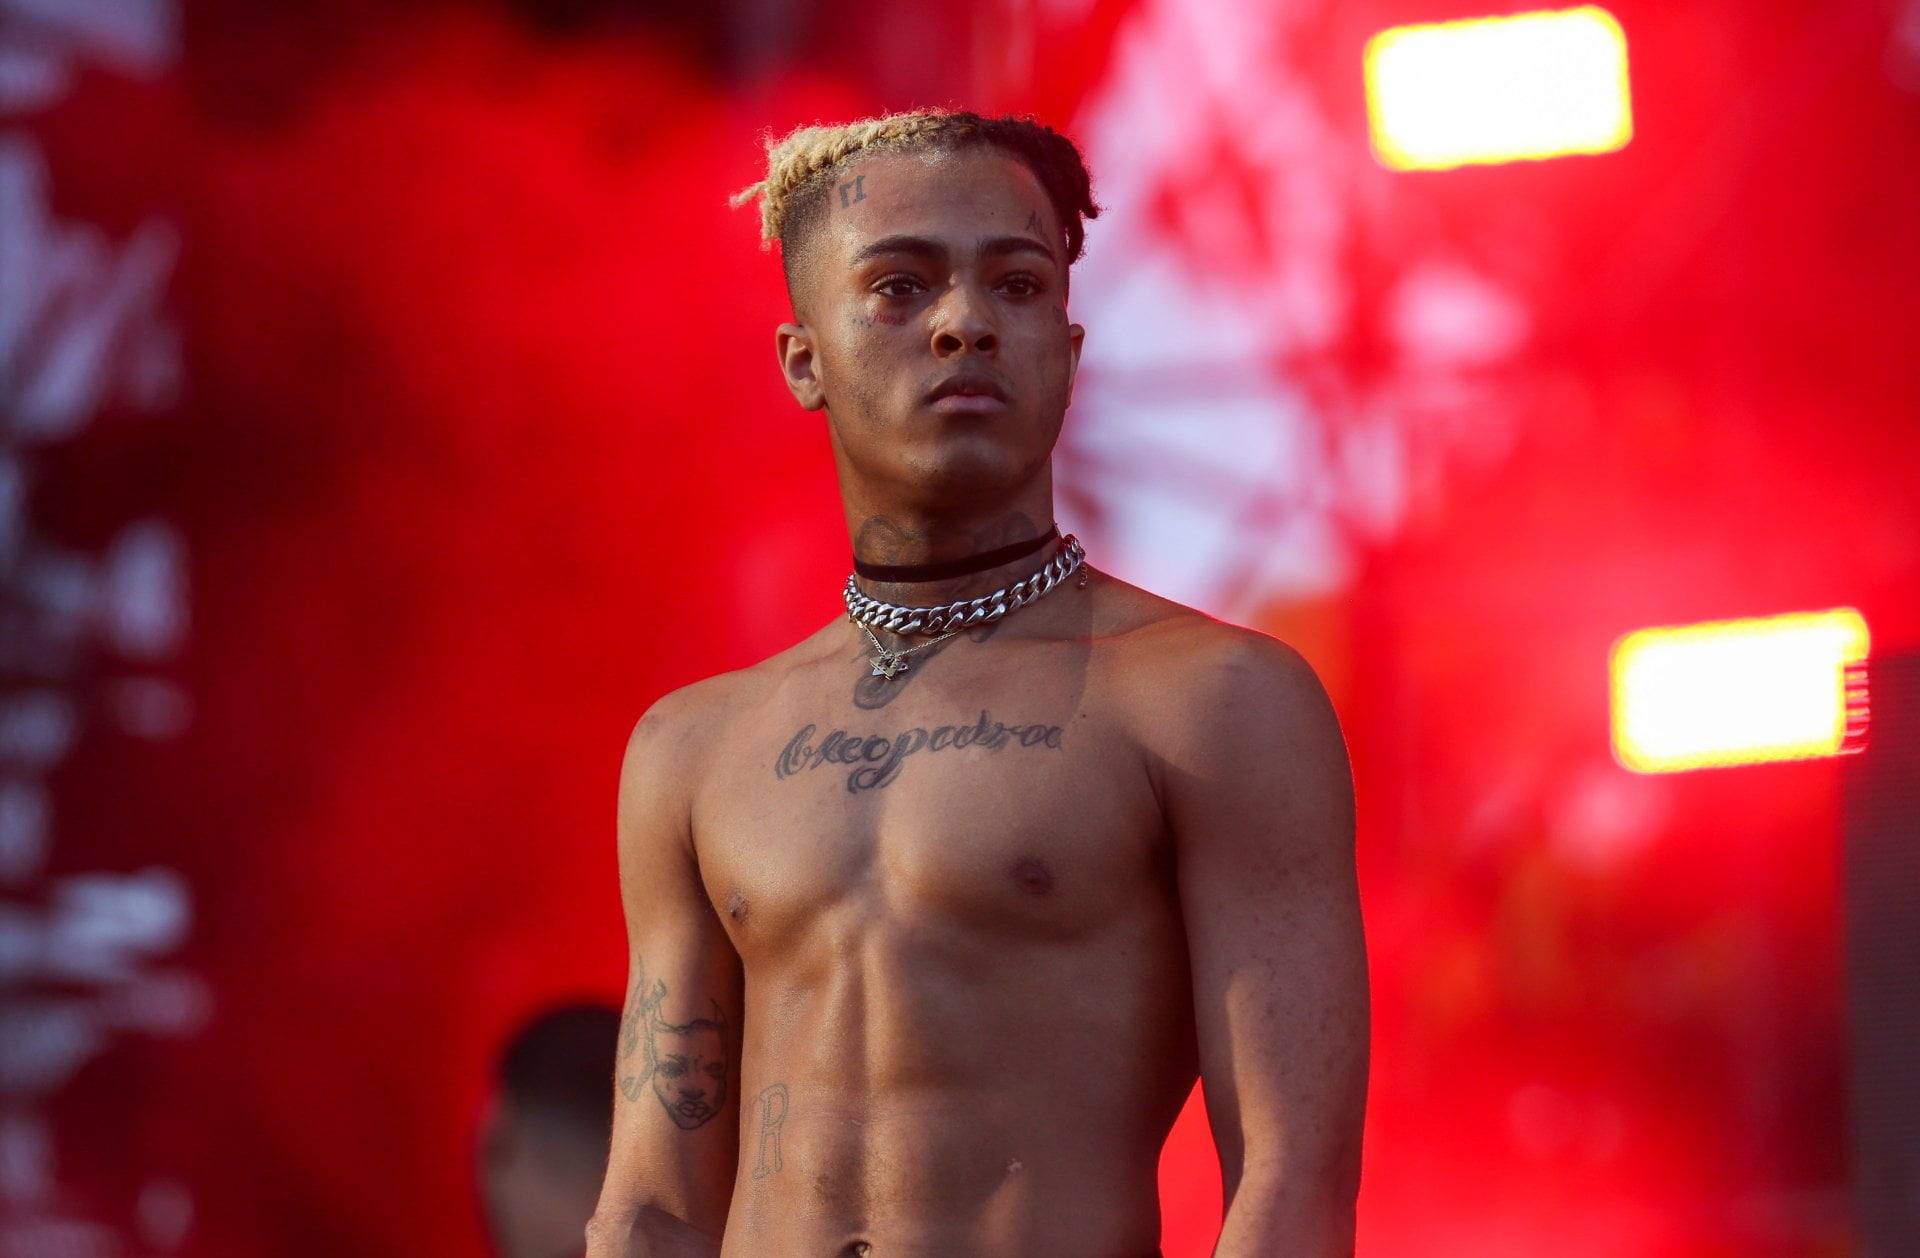 Singers Xxxtentacion Shirtless One Person Young